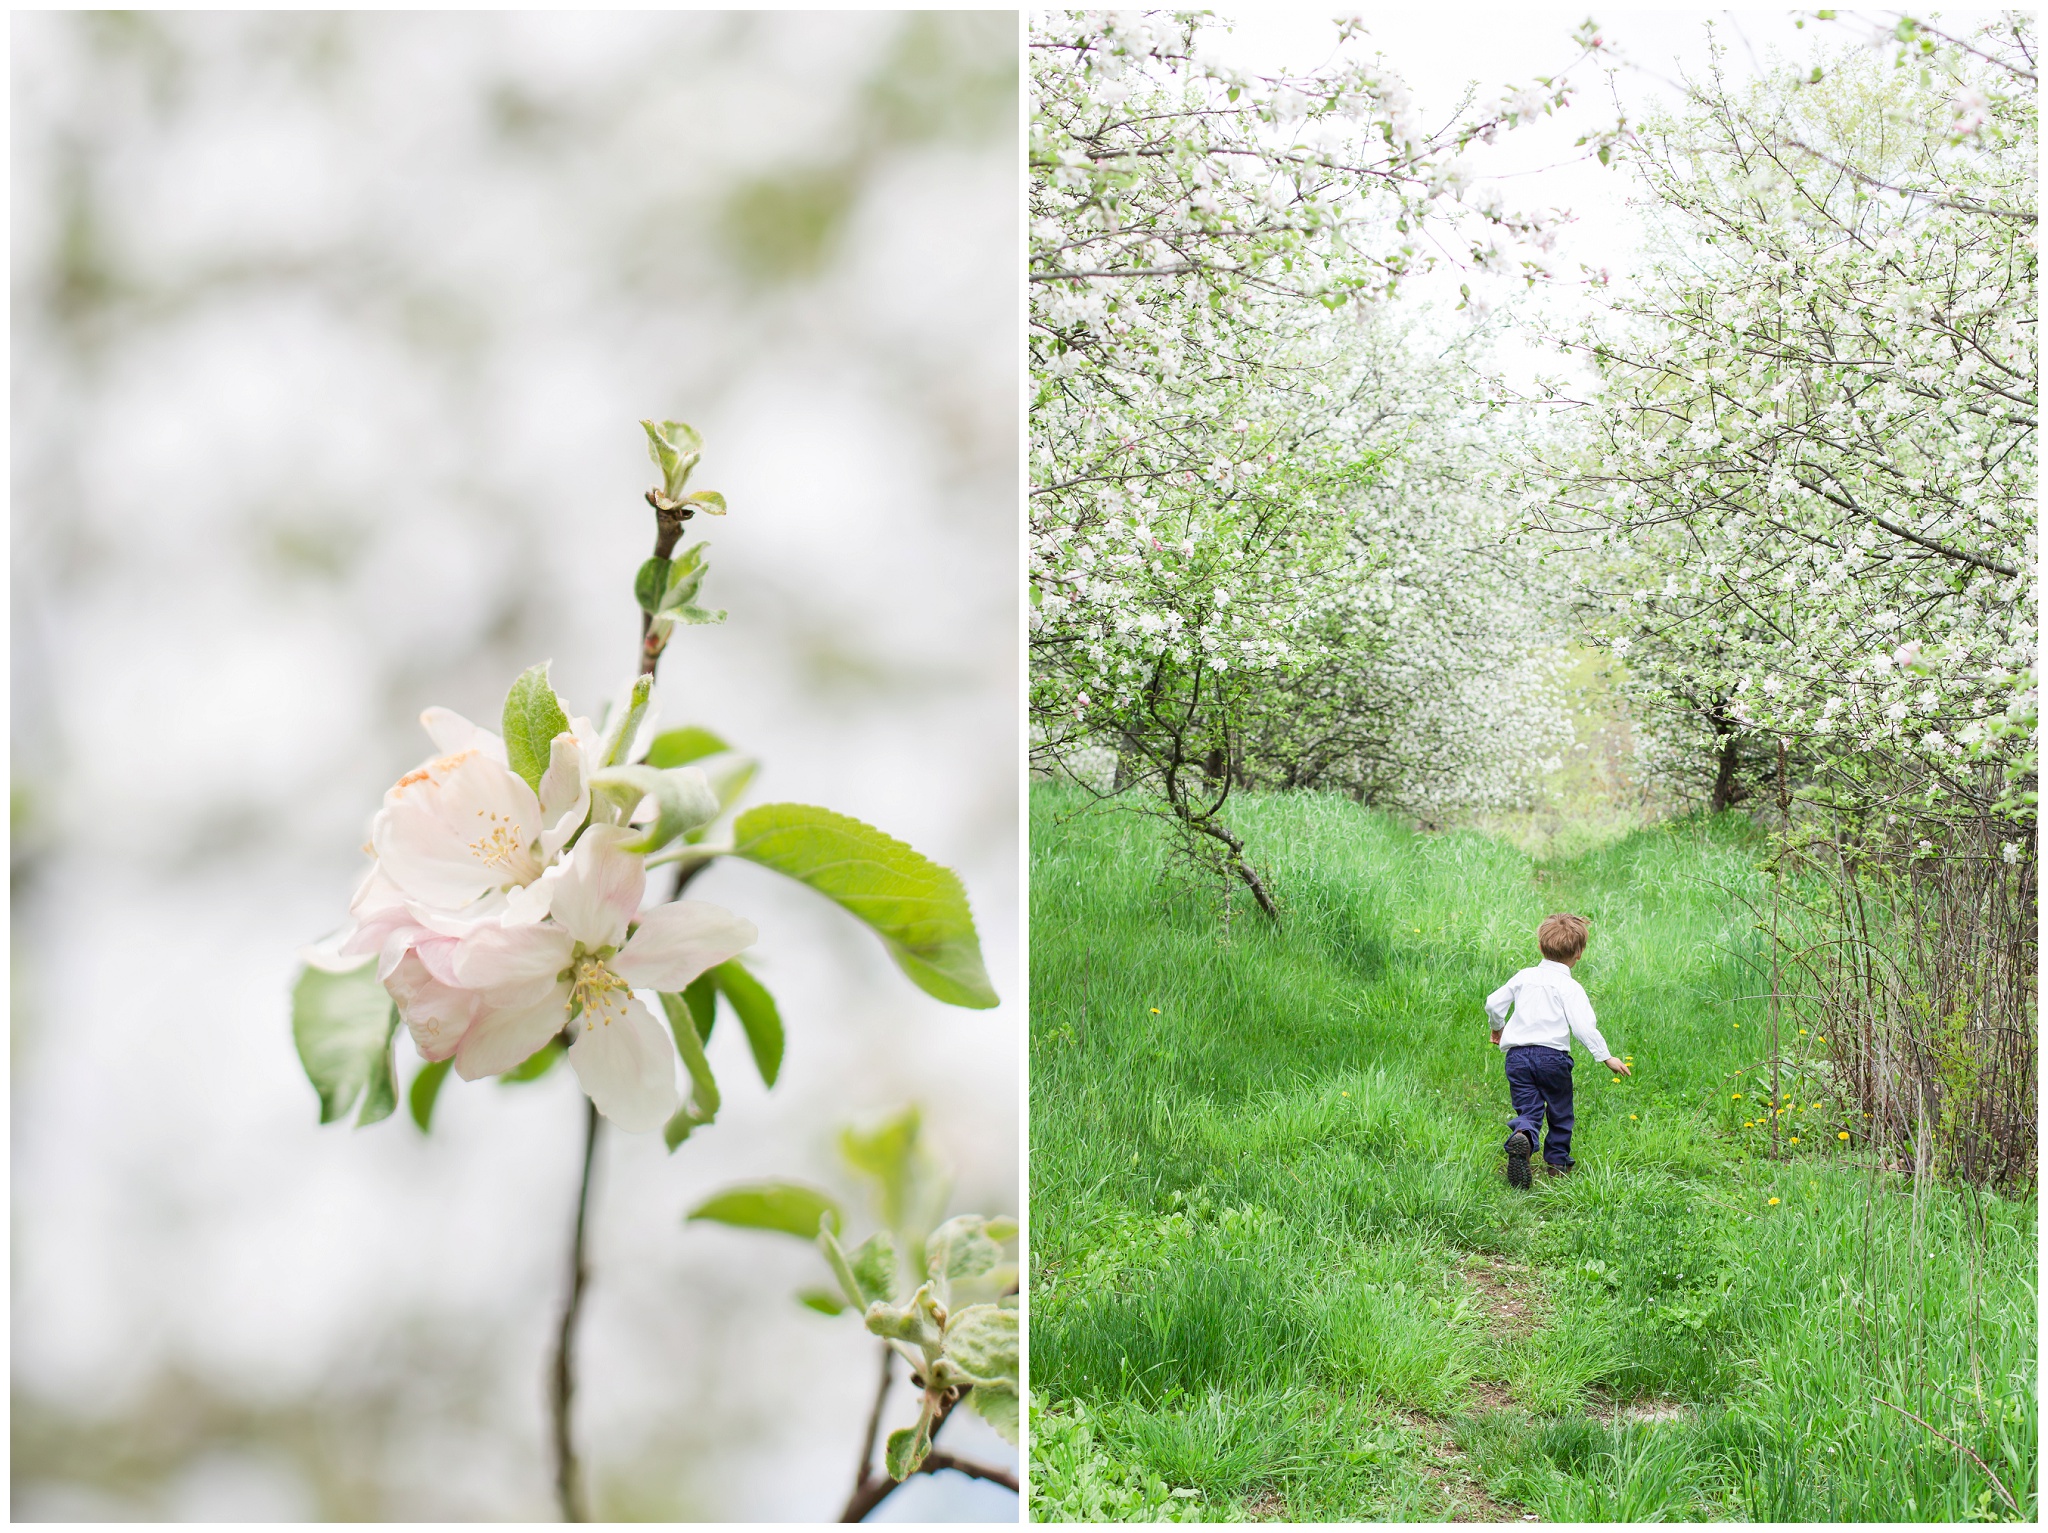 Seacoast New Hampshire Wedding Photographer | Apple Blossoms | Epping, NH 